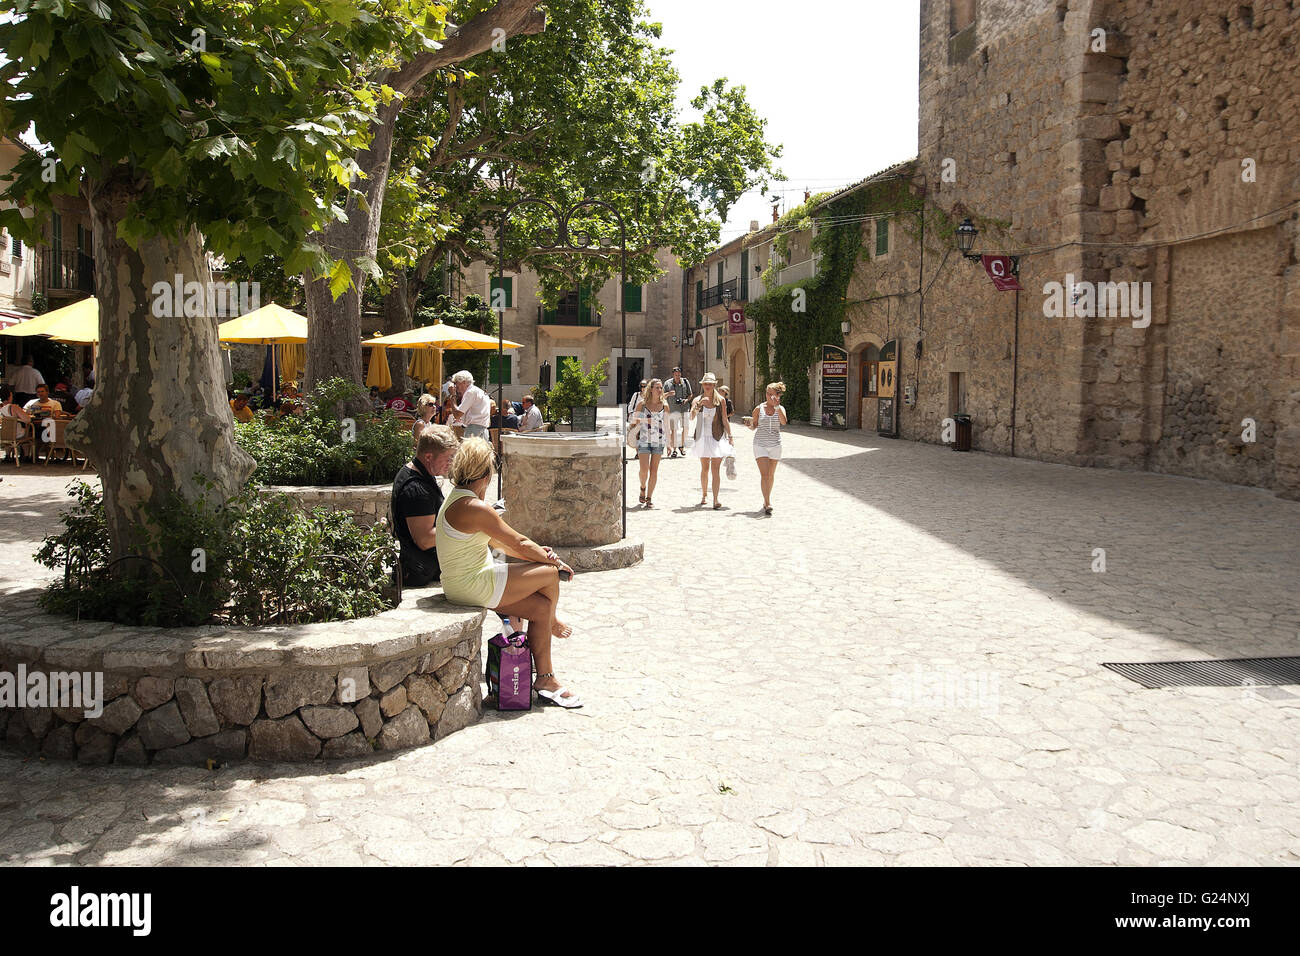 a beautiful wide angle shot of tourists sitting down and passing by in an old town in Palma de Mallorca, Spain, seaside, tourism Stock Photo